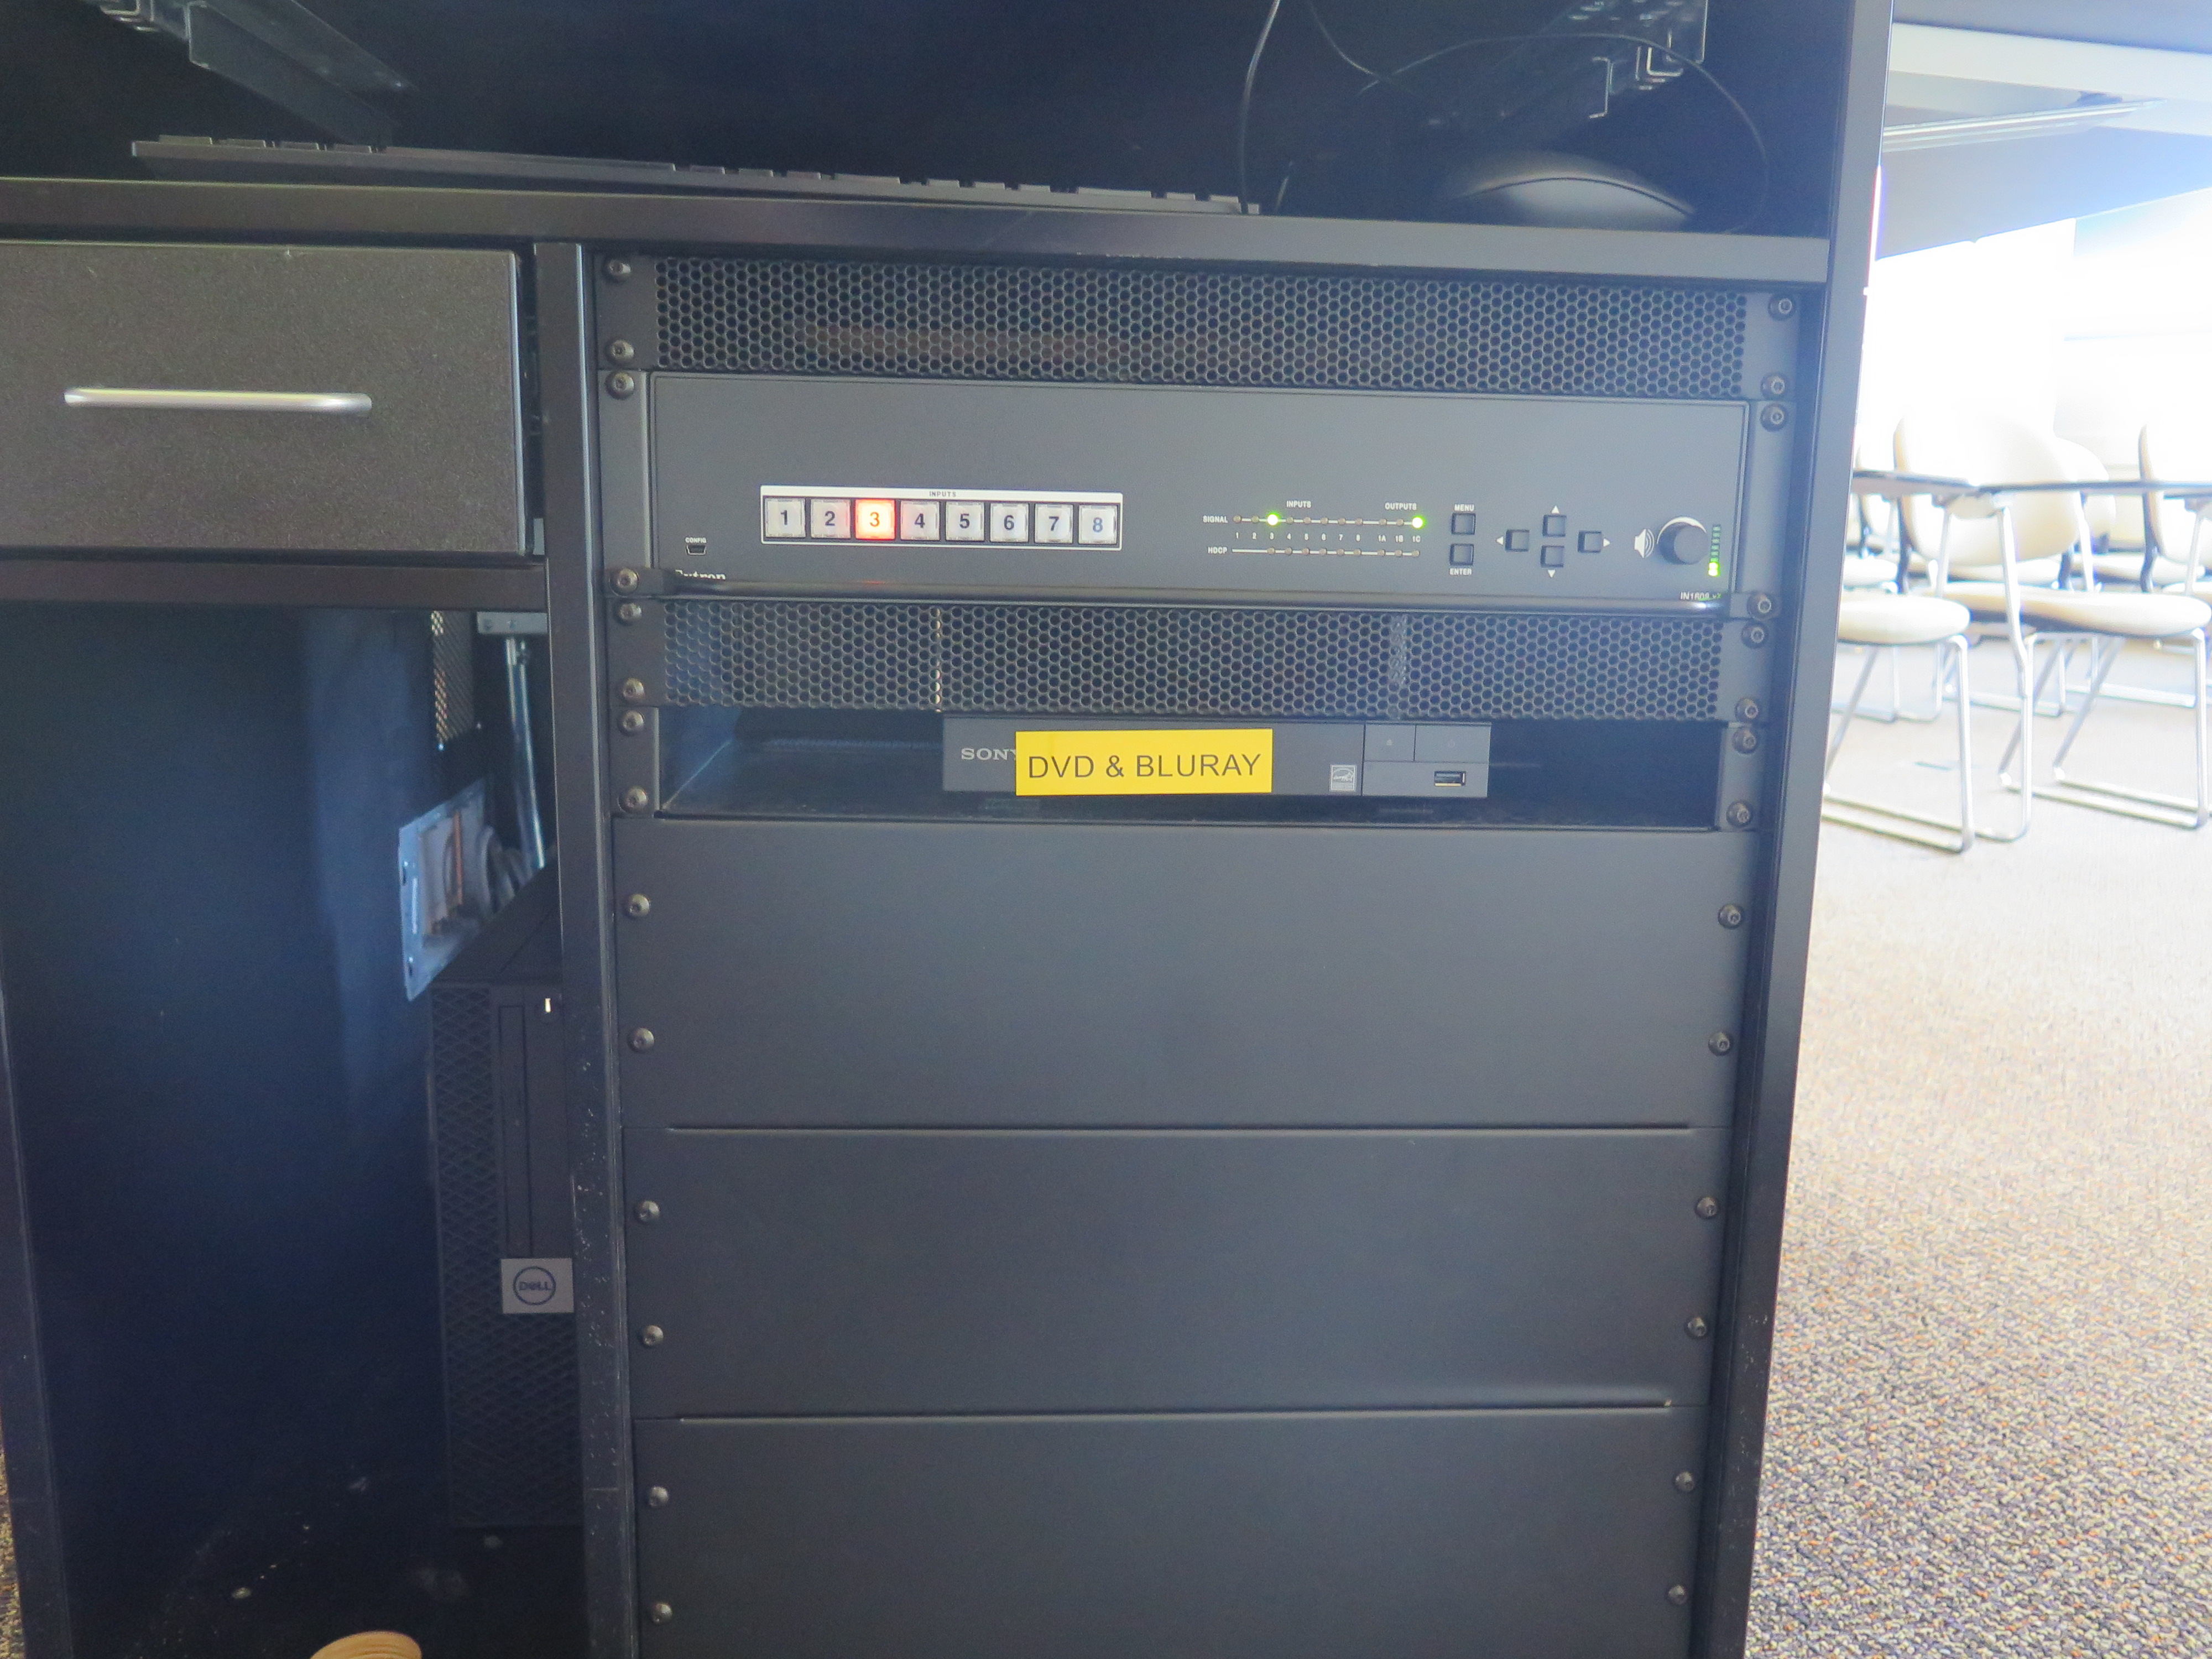 Front of Equipment rack showing AV Switcher. Below that is Blue-Ray/DVD Player. To the left is the compartment with the Dell Computer CPU.